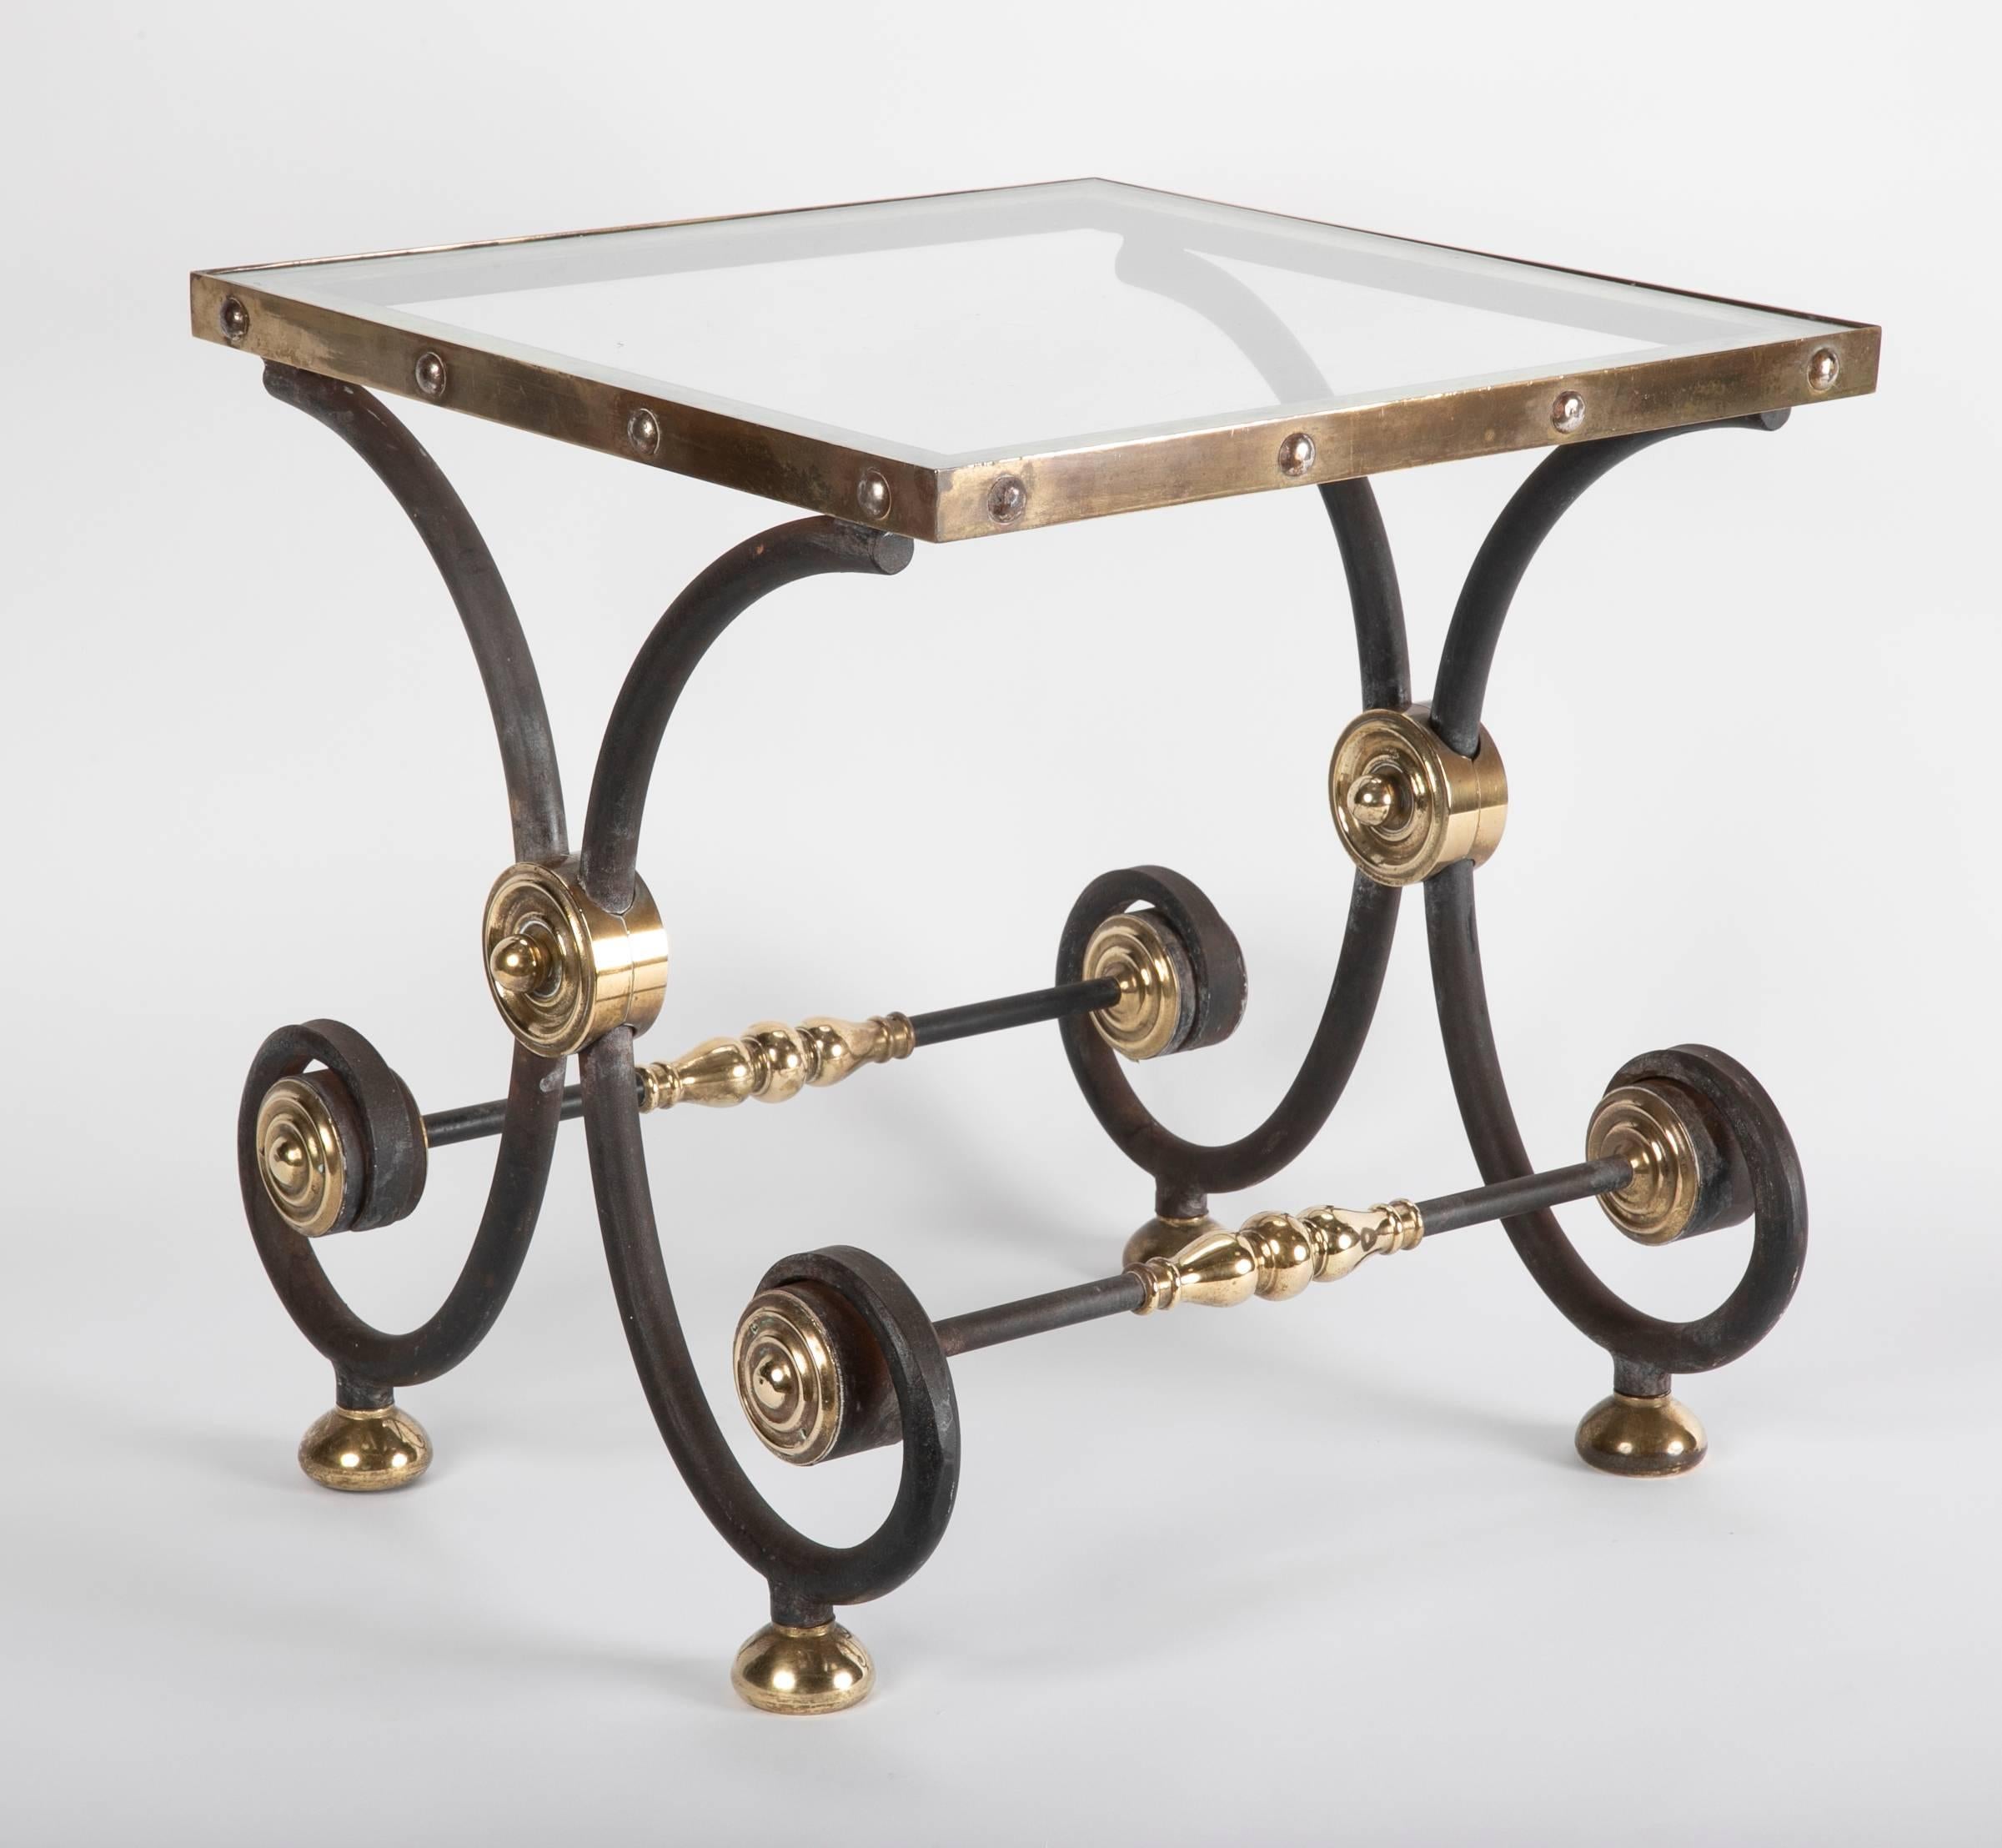 An Art Nouveau period French wrought iron and brass side or cocktail table with glass top. If you are looking for a unique side table this is it. With its elegant profile of wrought iron scrolls joined by finely turned brass bosses, the glass top in